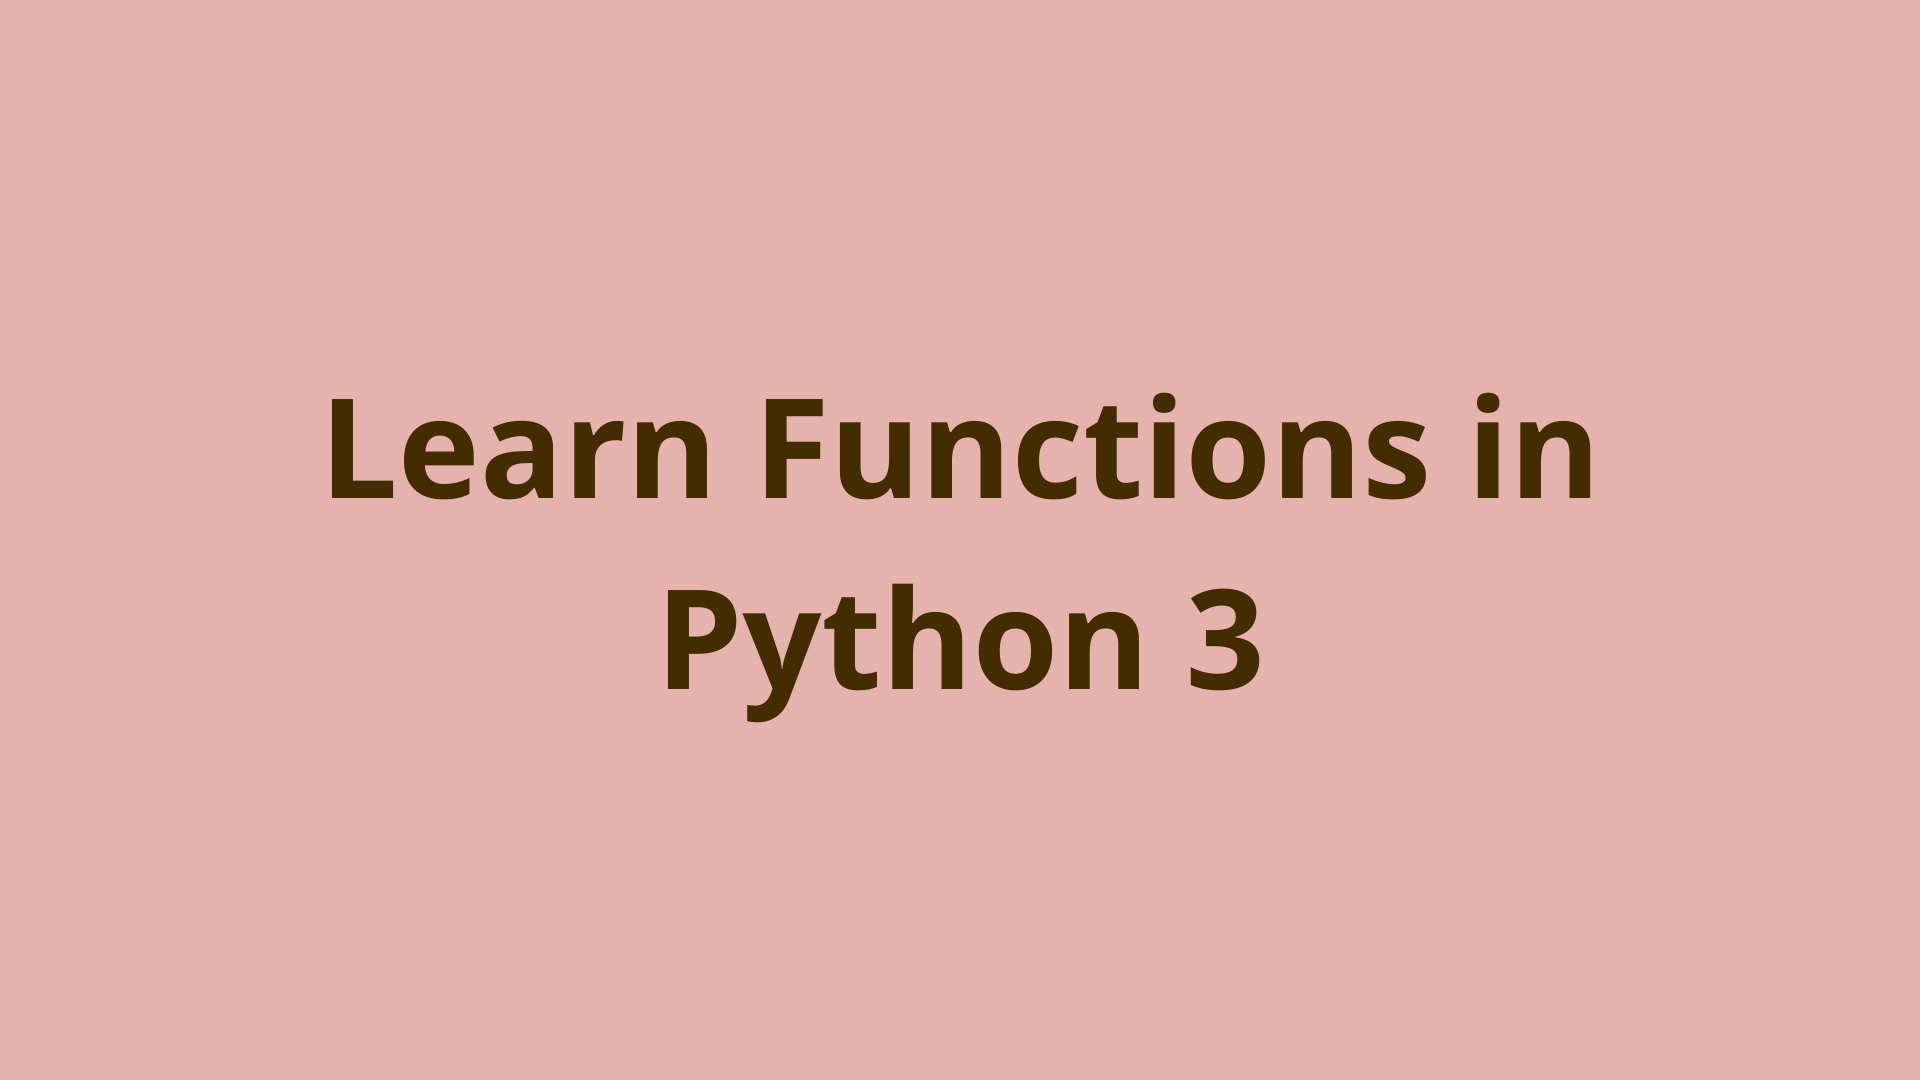 Image of Python 3 functions - learn Python programming tutorial